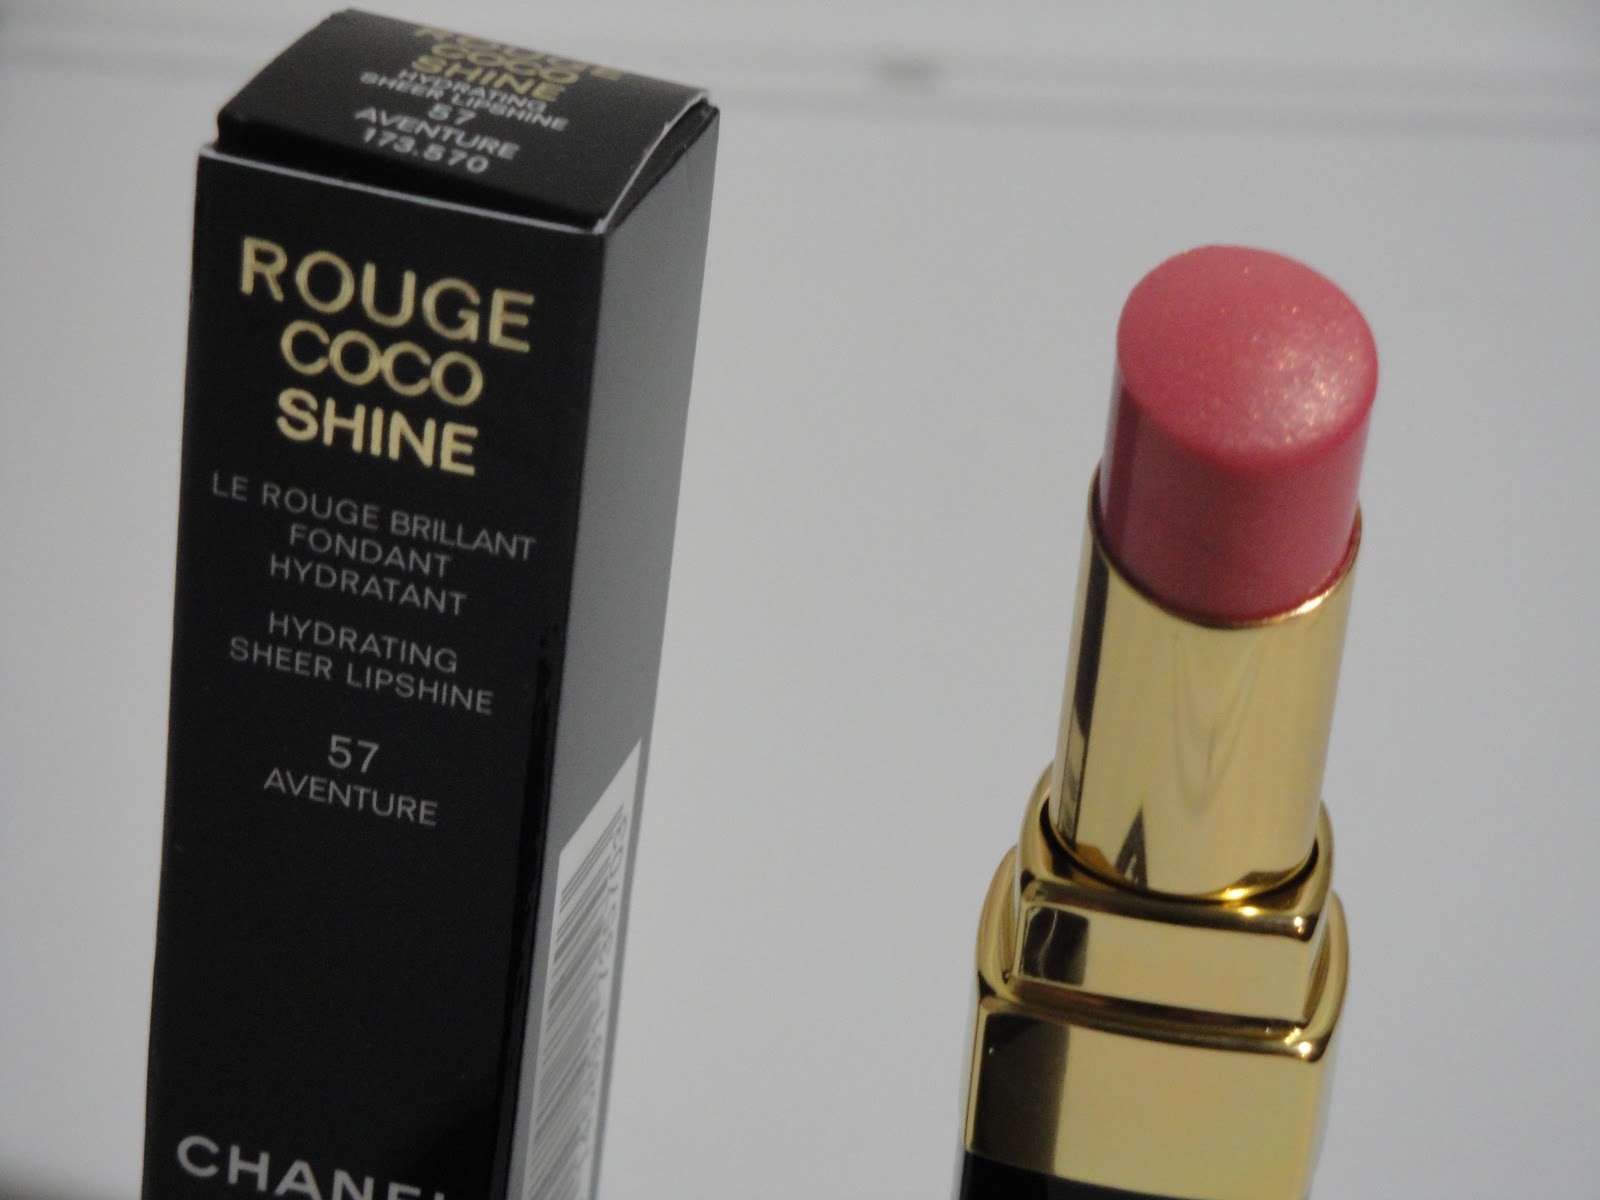 A Few Hard-To-Find Chanel Exclusives - The Beauty Look Book